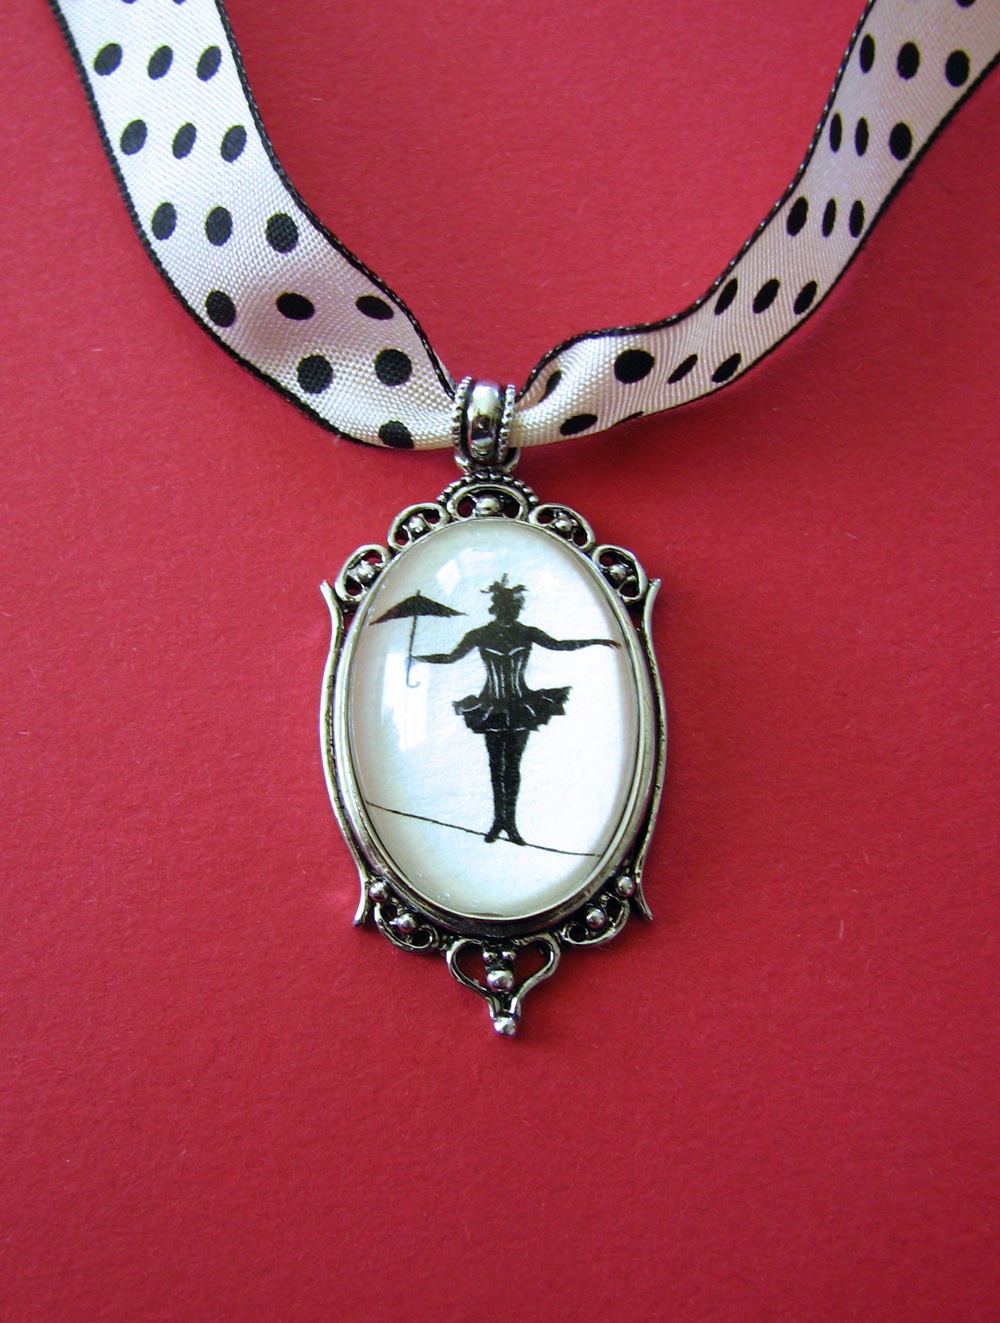 ELVIRA on a TIGHTROPE Choker Necklace, pendant on ribbon - Silhouette Jewelry